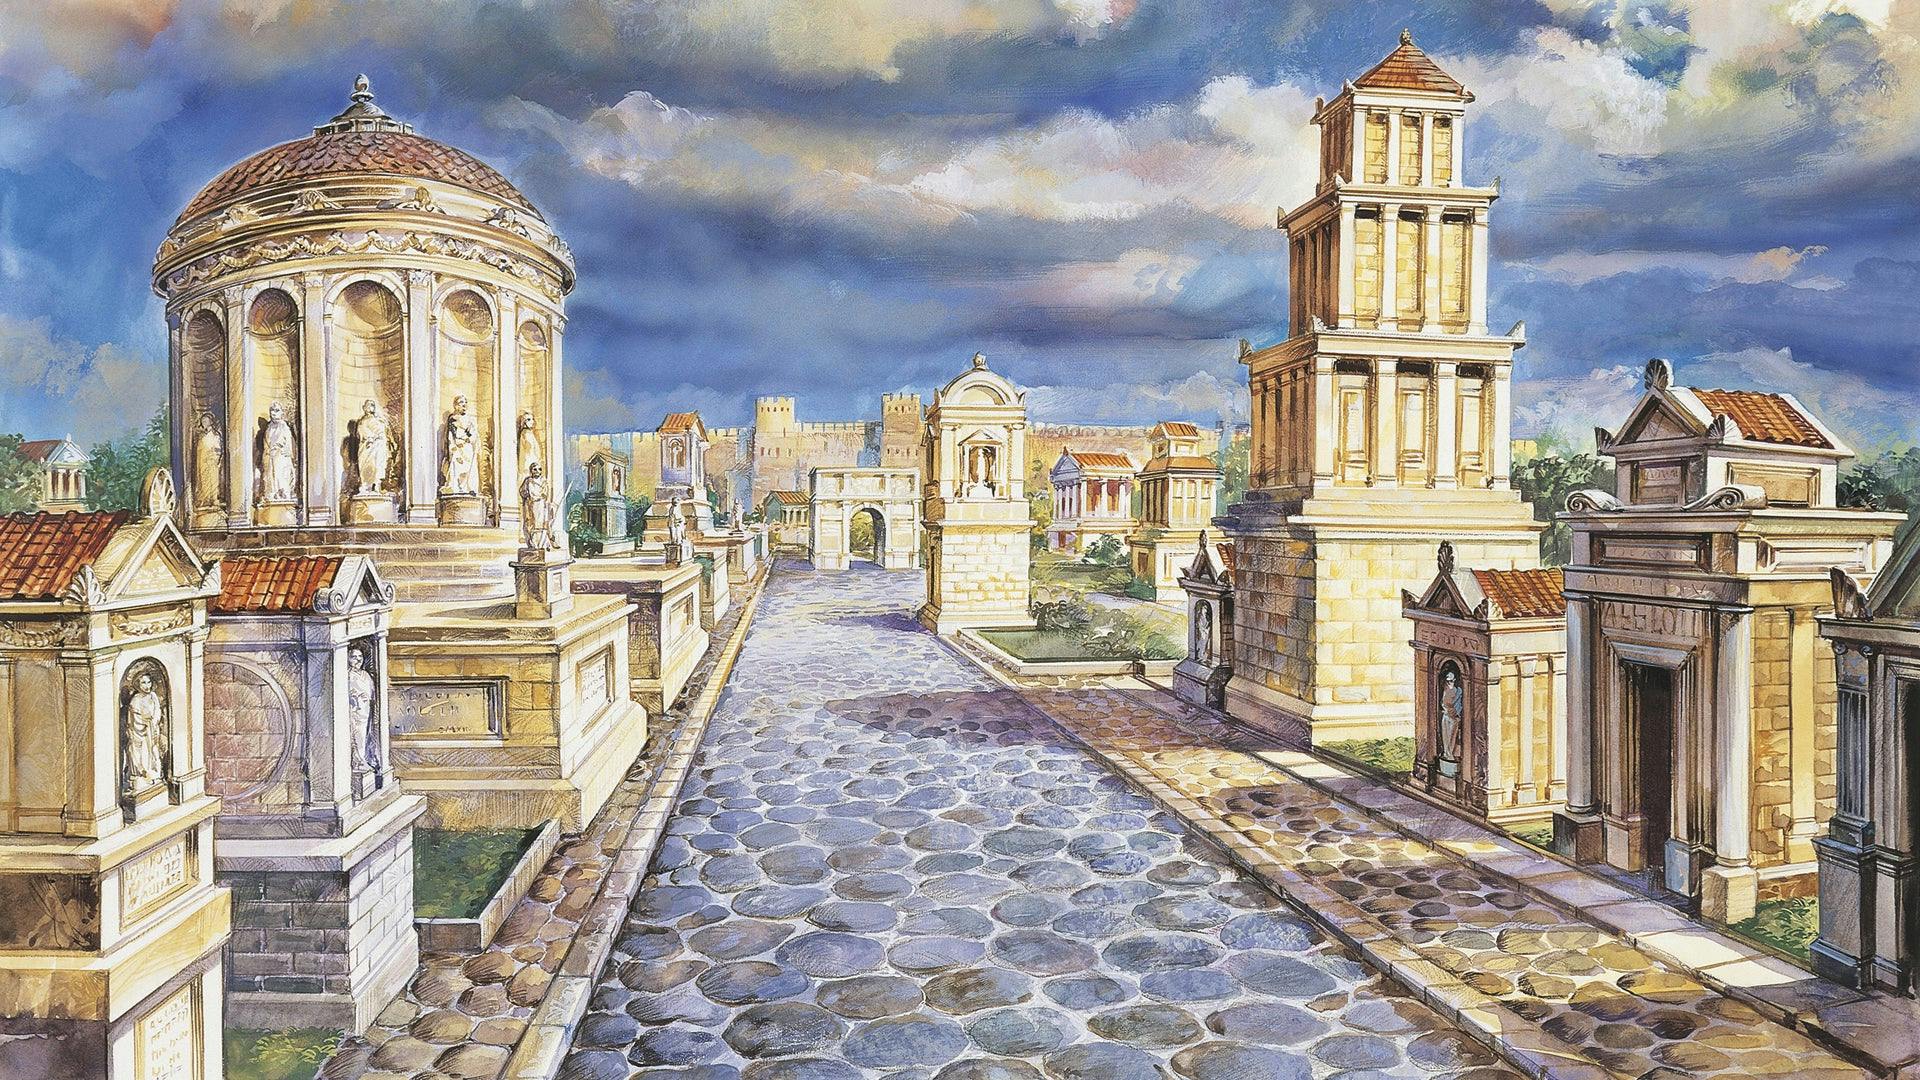 A watercolor painting of what an ancient Roman road looked like as it wound through a city.